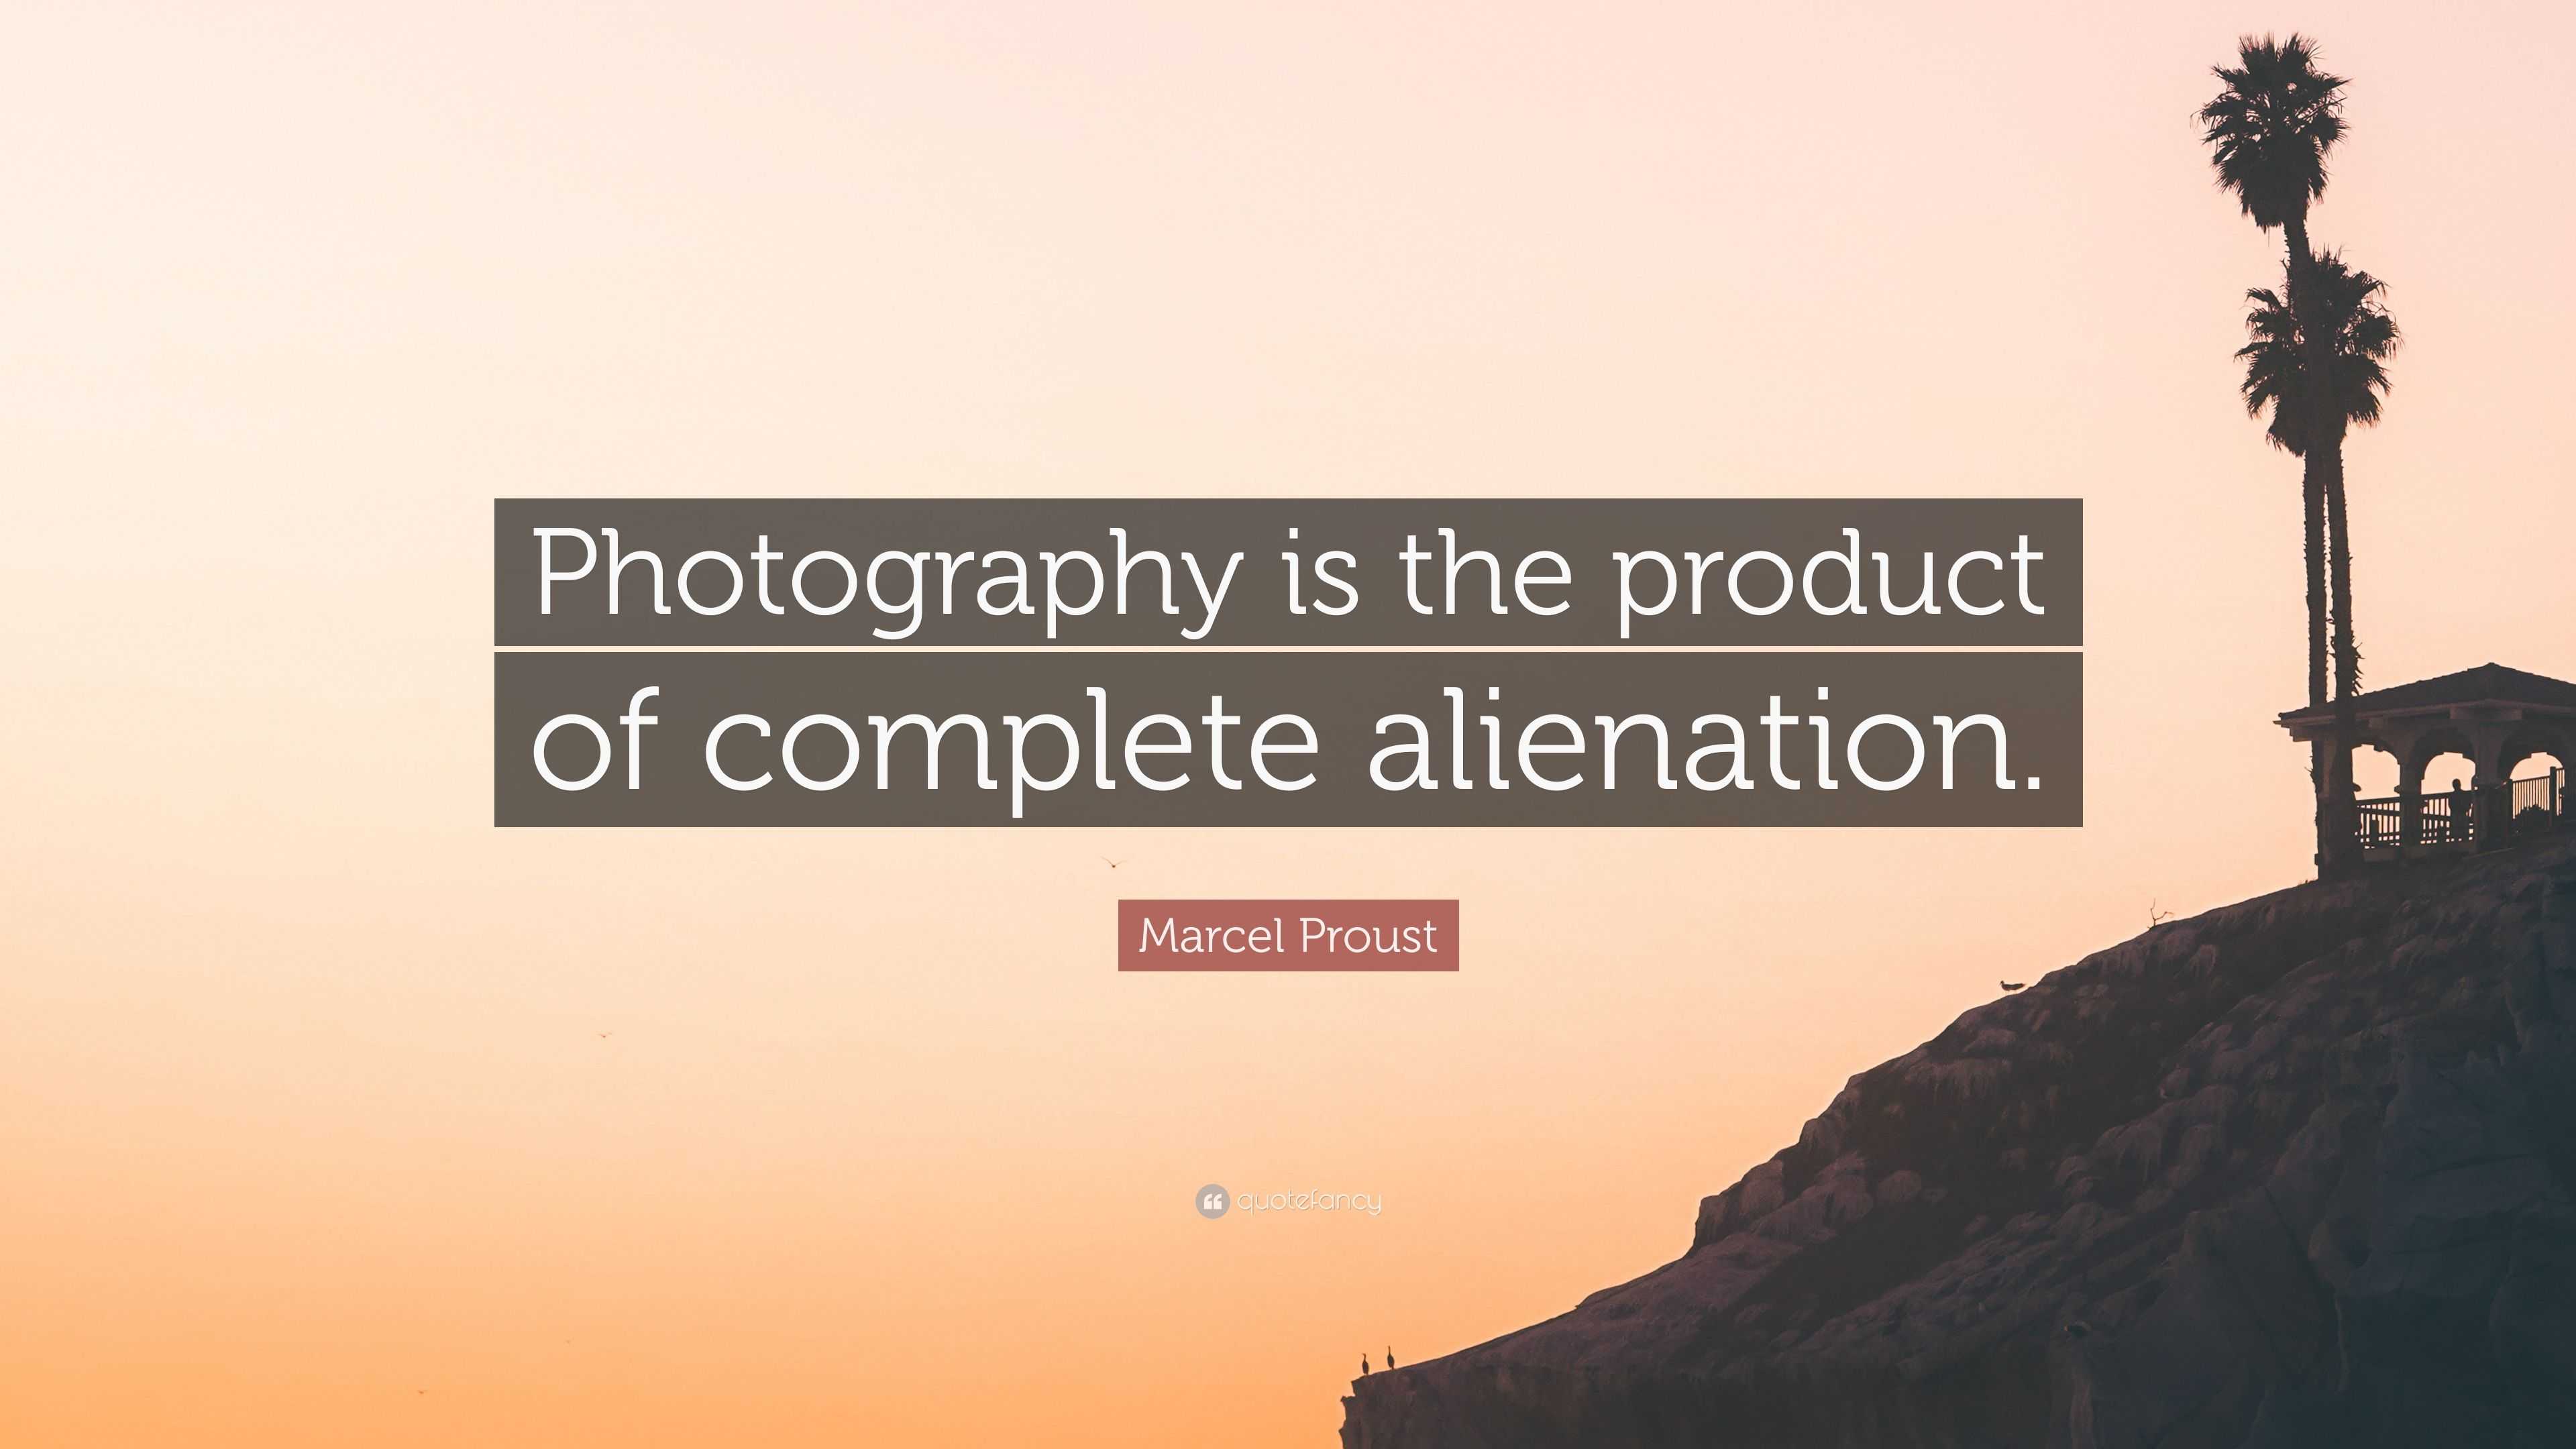 Marcel Proust Quote: “Photography is the product of complete alienation.”